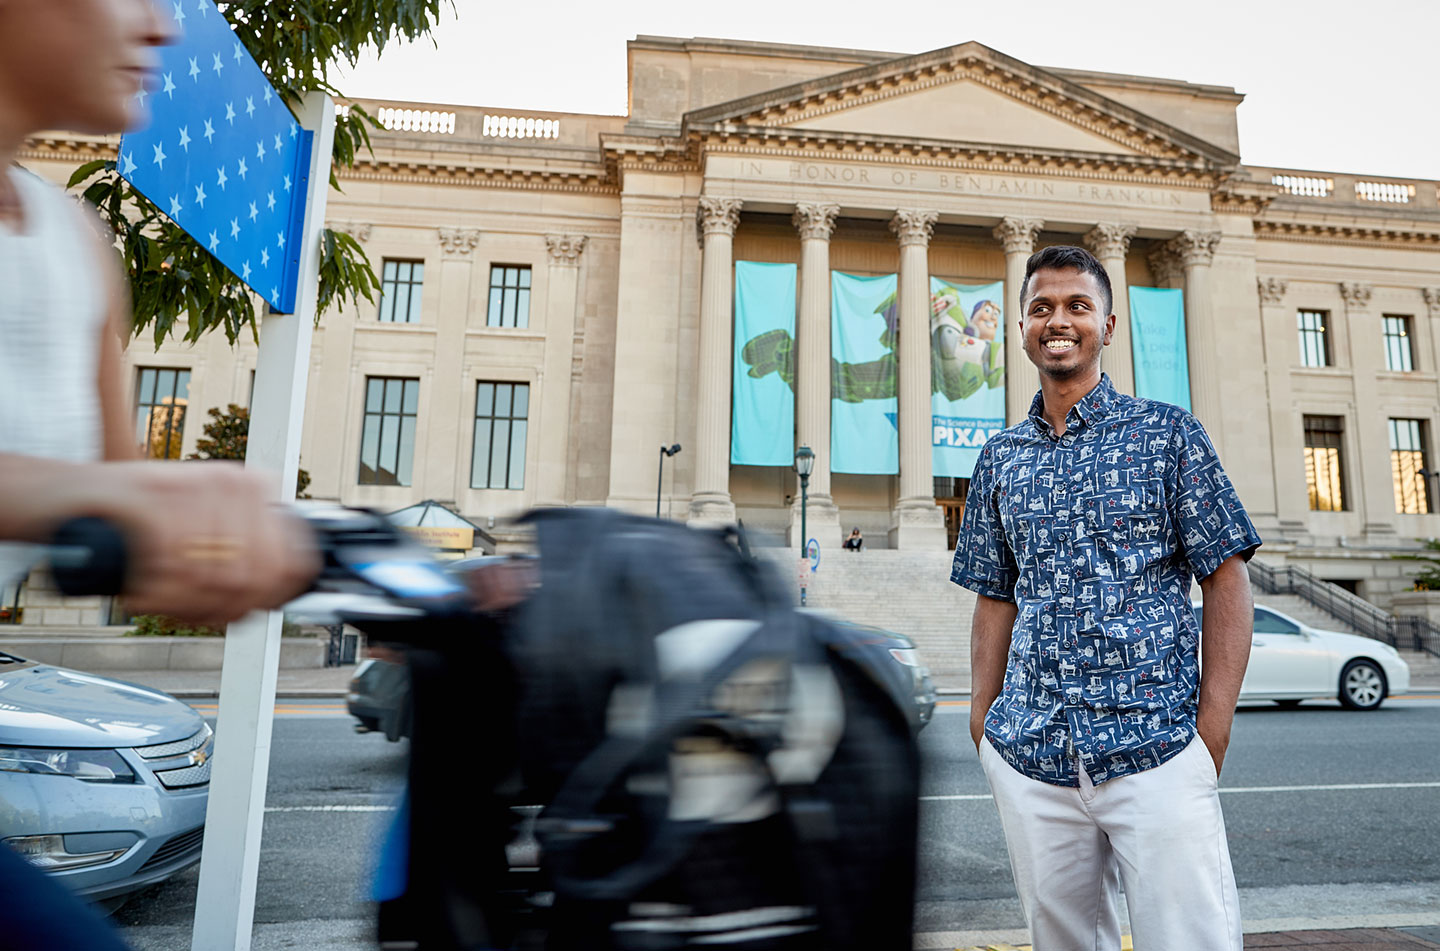 Alternate take with a bit of the city mixing in - Dale Oommen, TCNJ '17, at the Franklin Institute. Philadelphia, PA, August, 2017.